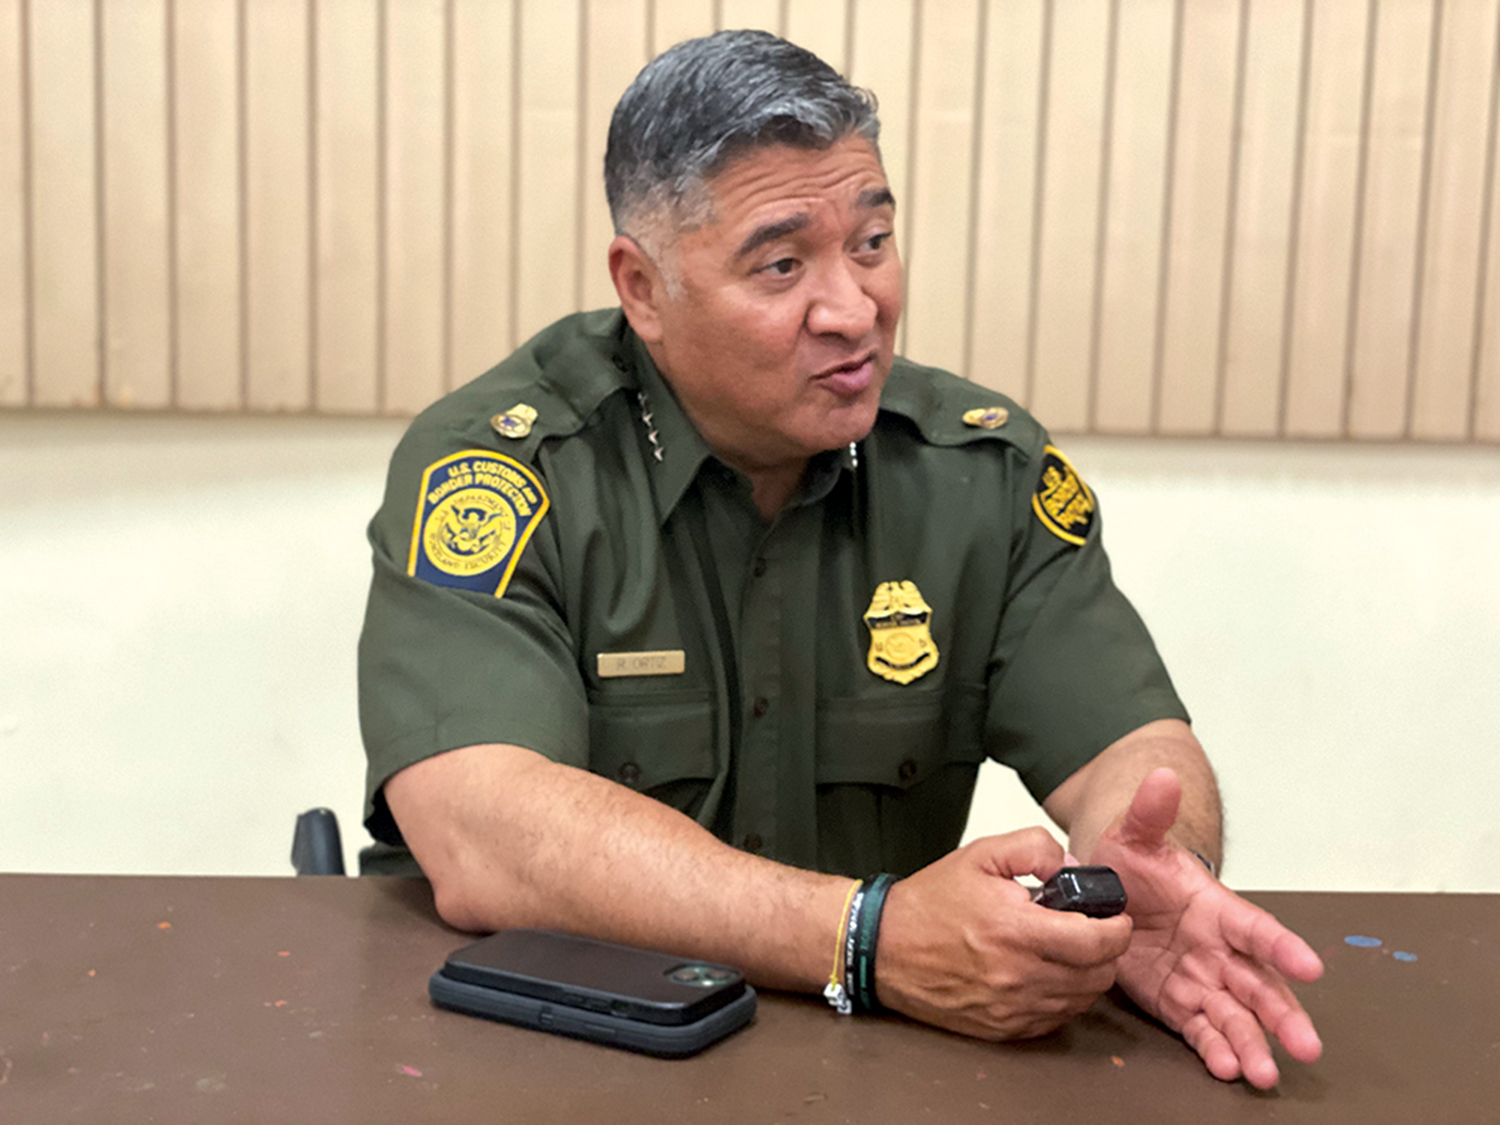 San Diego's new Border Patrol chief shares her priorities. 'We can